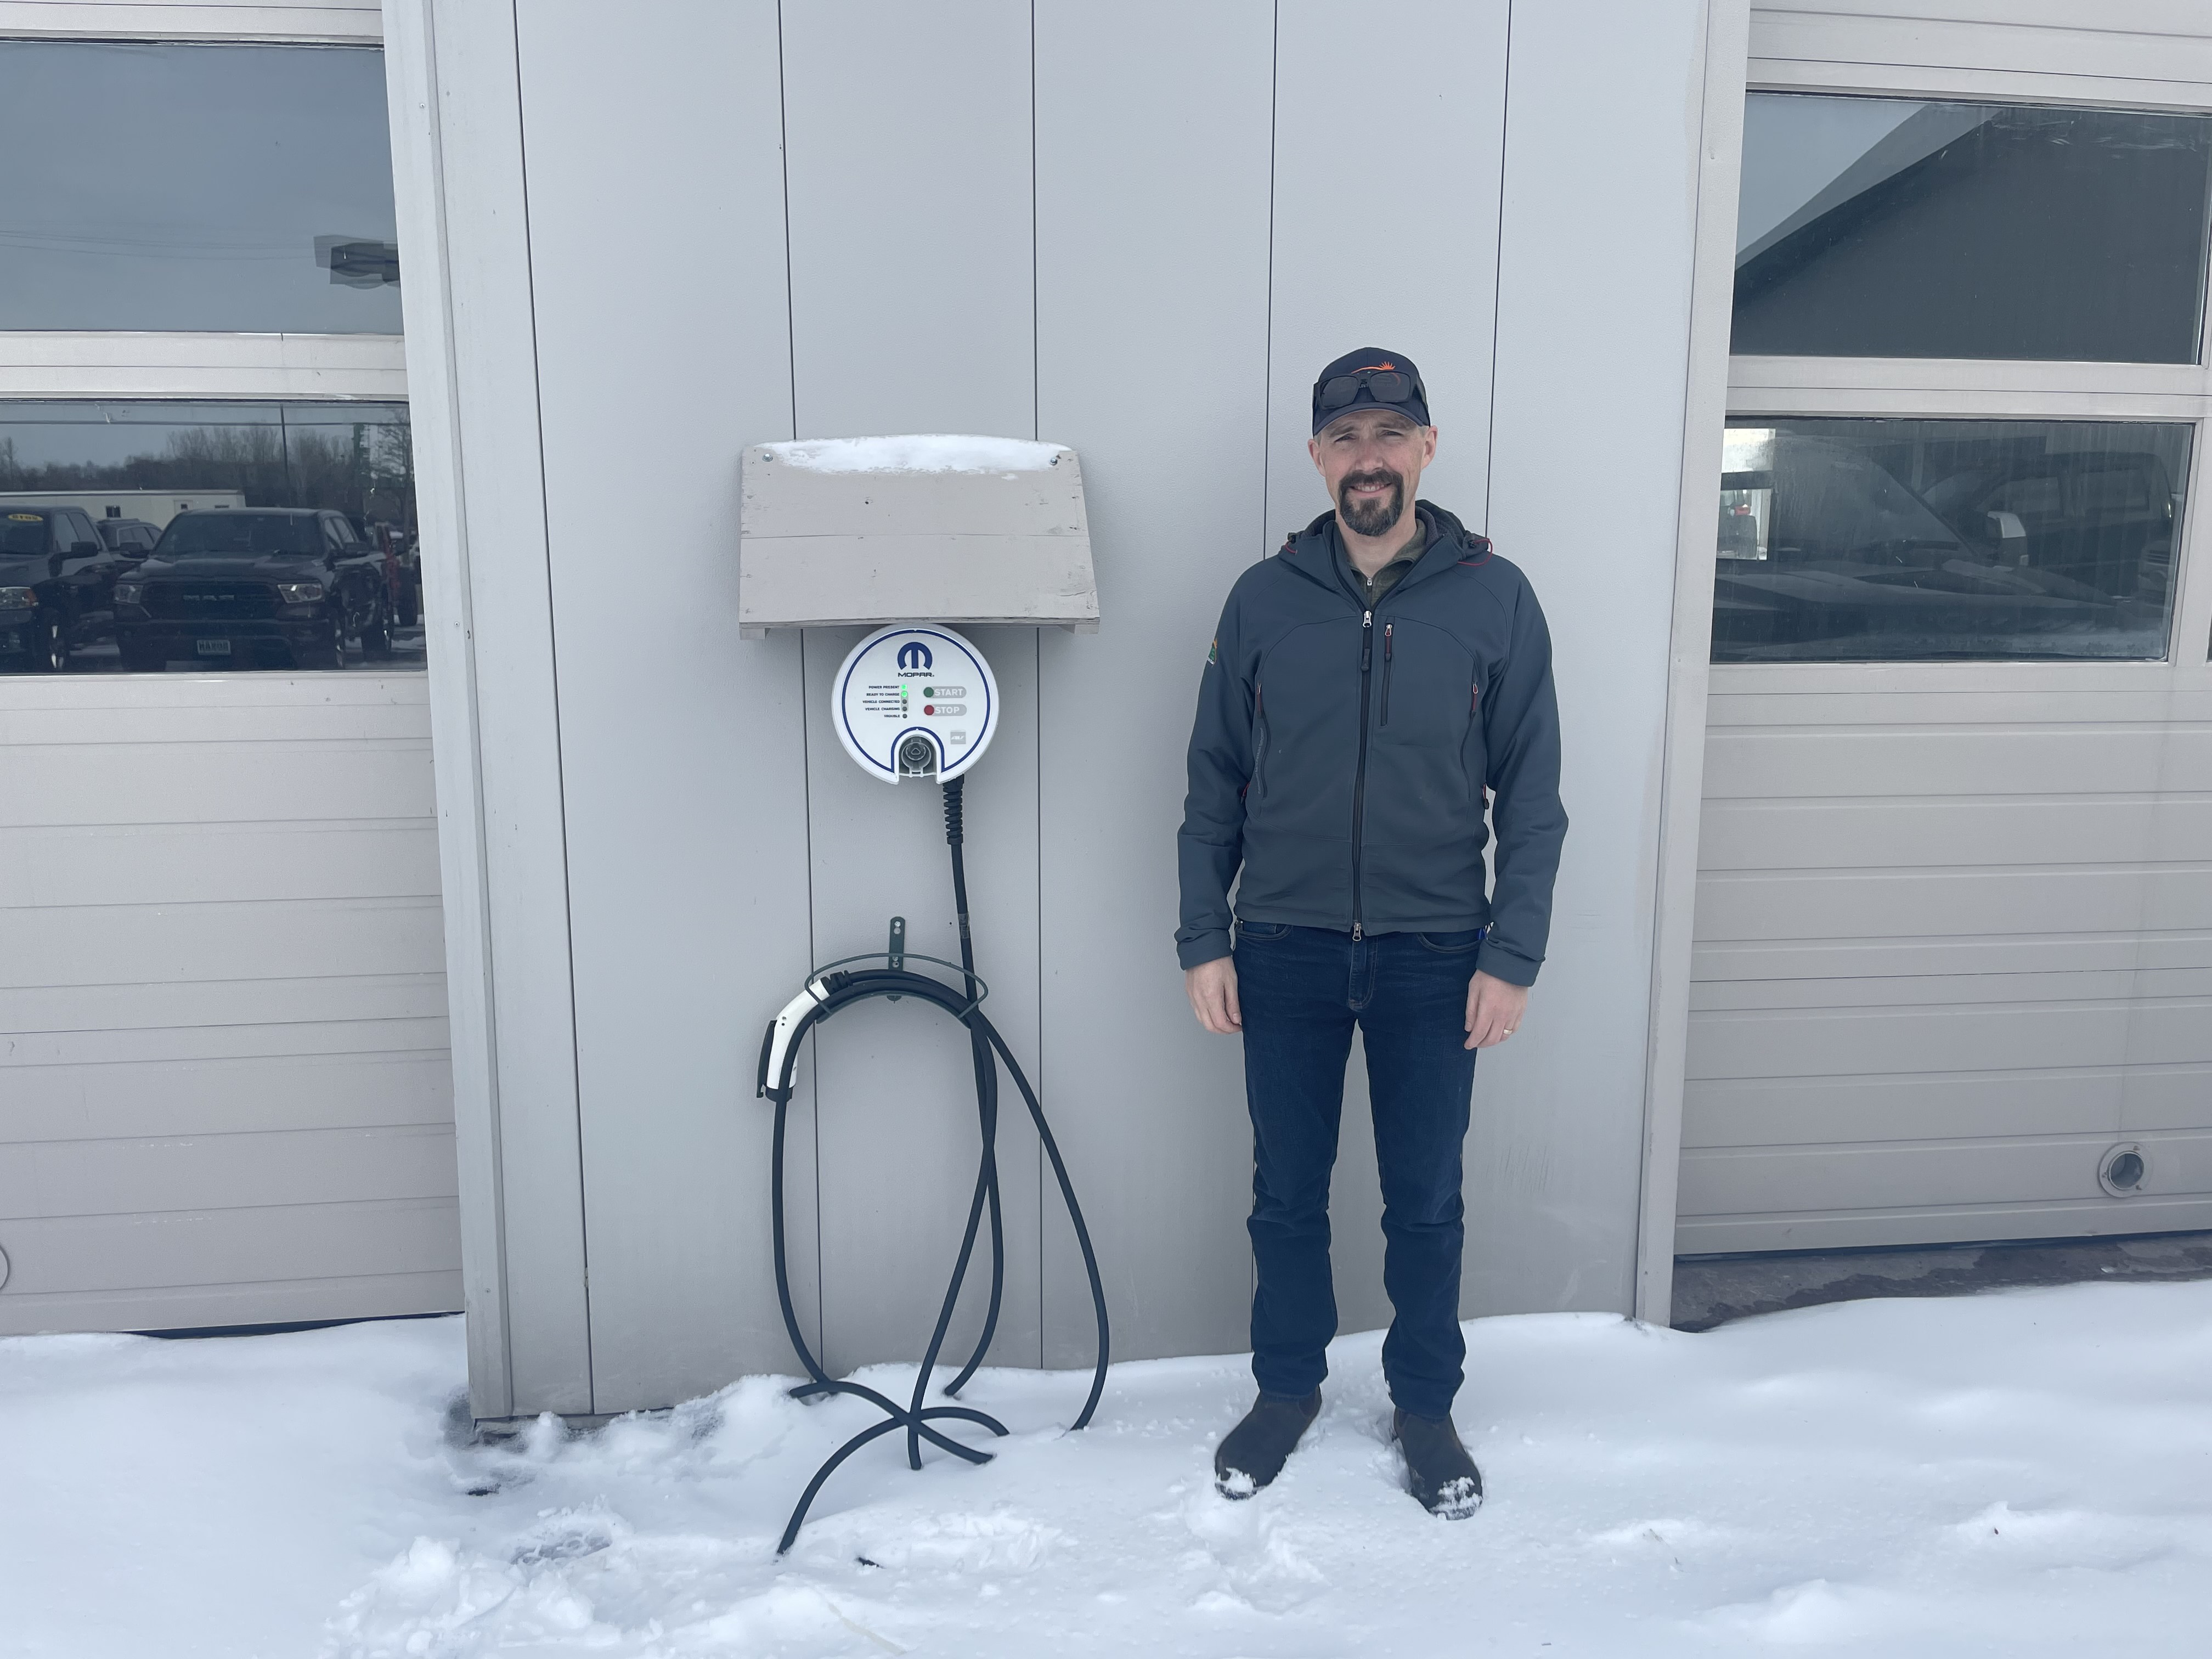 Green Mountain Solar president with EV charger